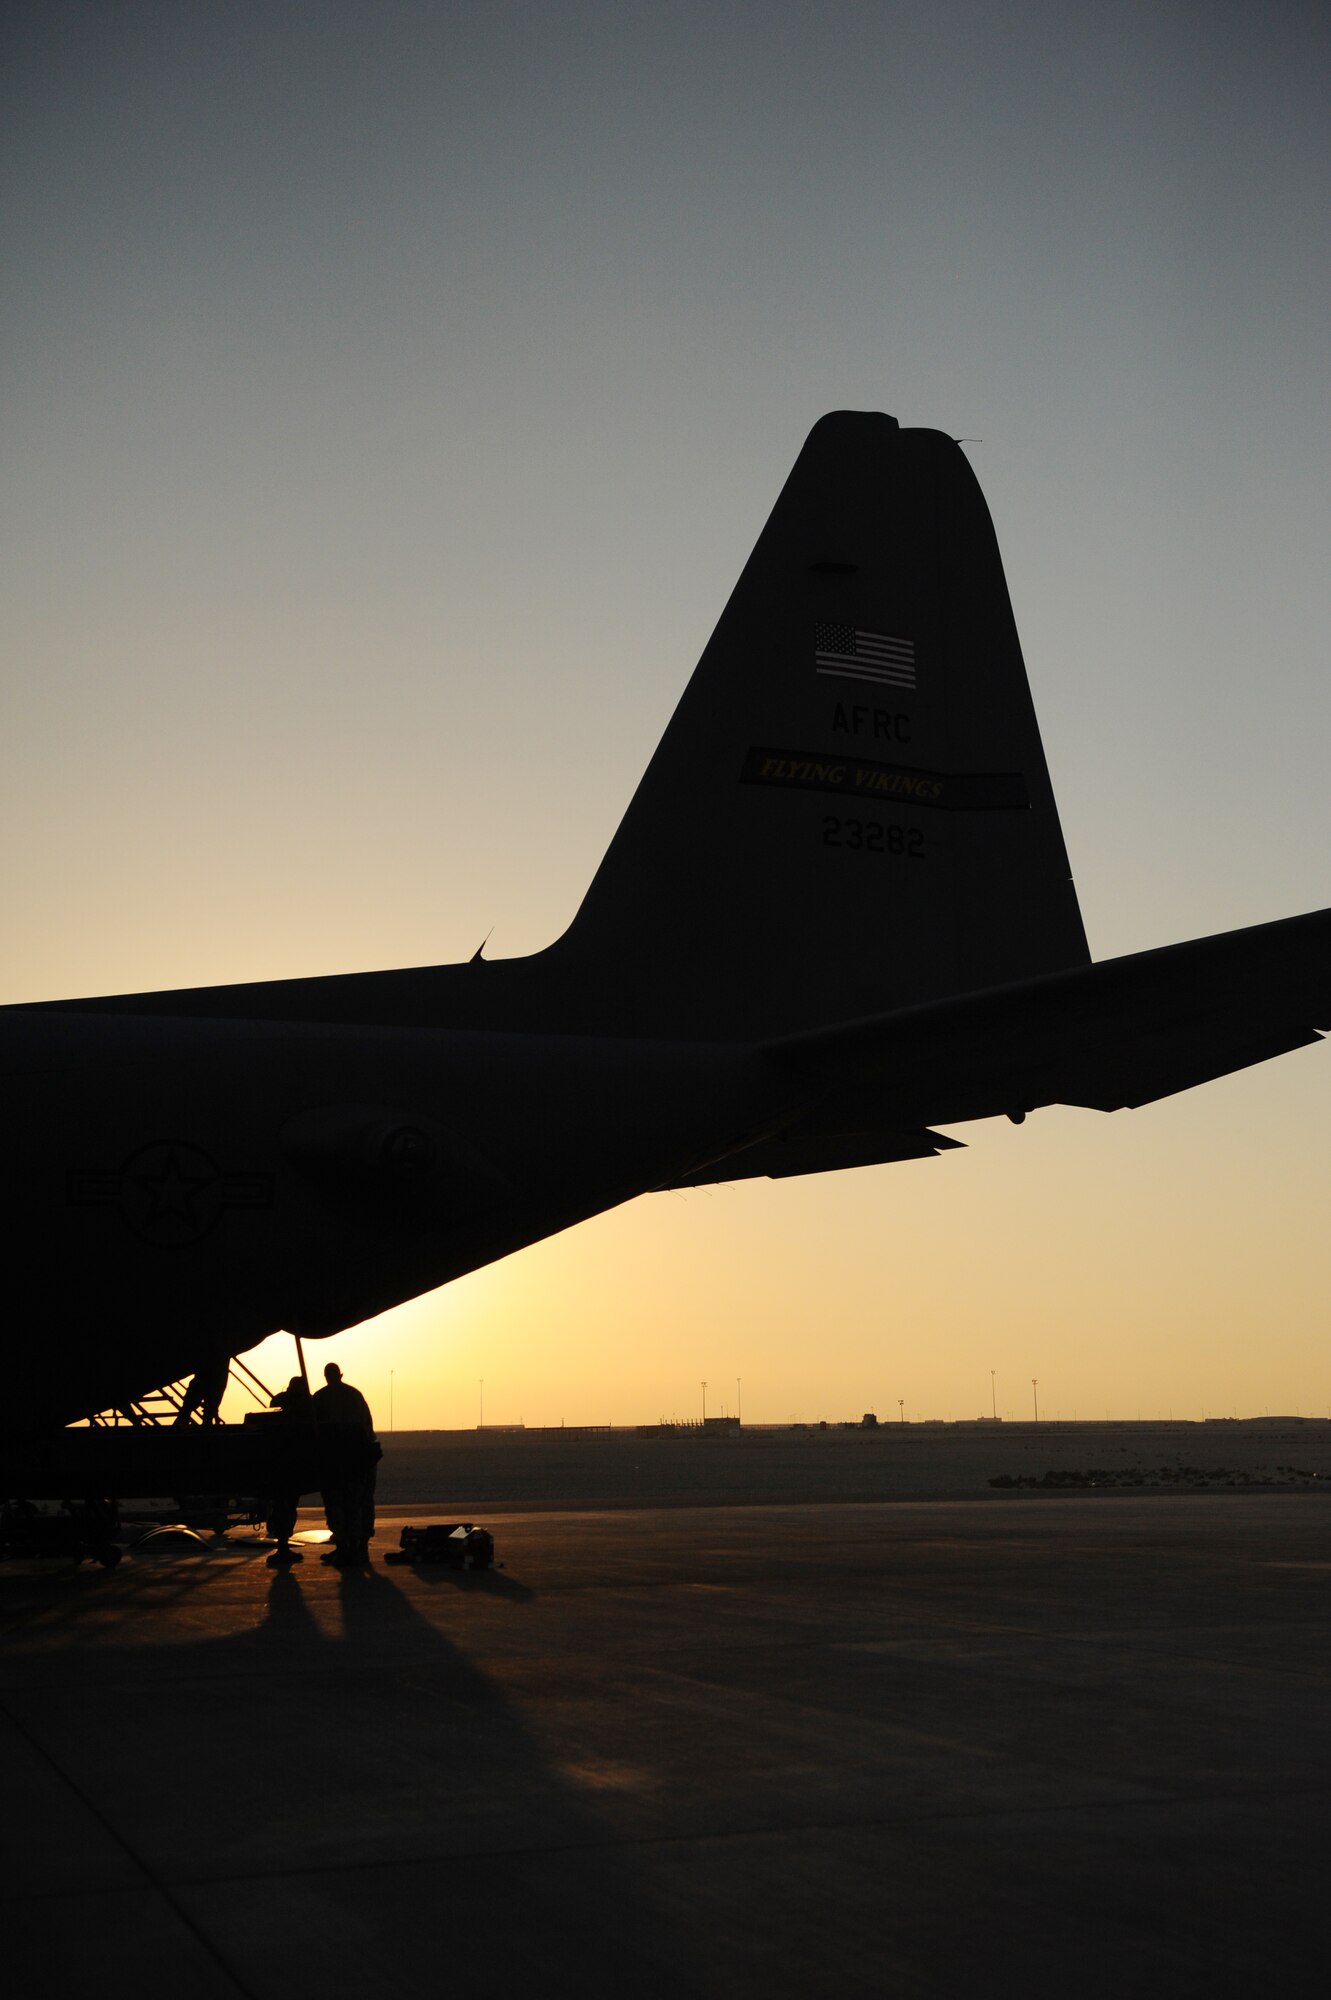 SOUTHWEST ASIA – Airmen from the 746th Expeditionary Aircraft Maintenance Unit work on a C-130H3 Hercules during a home station check here Feb. 28, 2012. The Airmen work on the aircraft 24-hours a day during home station checks to get the C-130 back into an operational status as soon as possible. C-130s are able to land on both standard and substandard runways, and can also take off in relatively short distances, which makes it useful for specialized missions. (U.S. Air Force photo/Staff Sgt. Nathanael Callon)